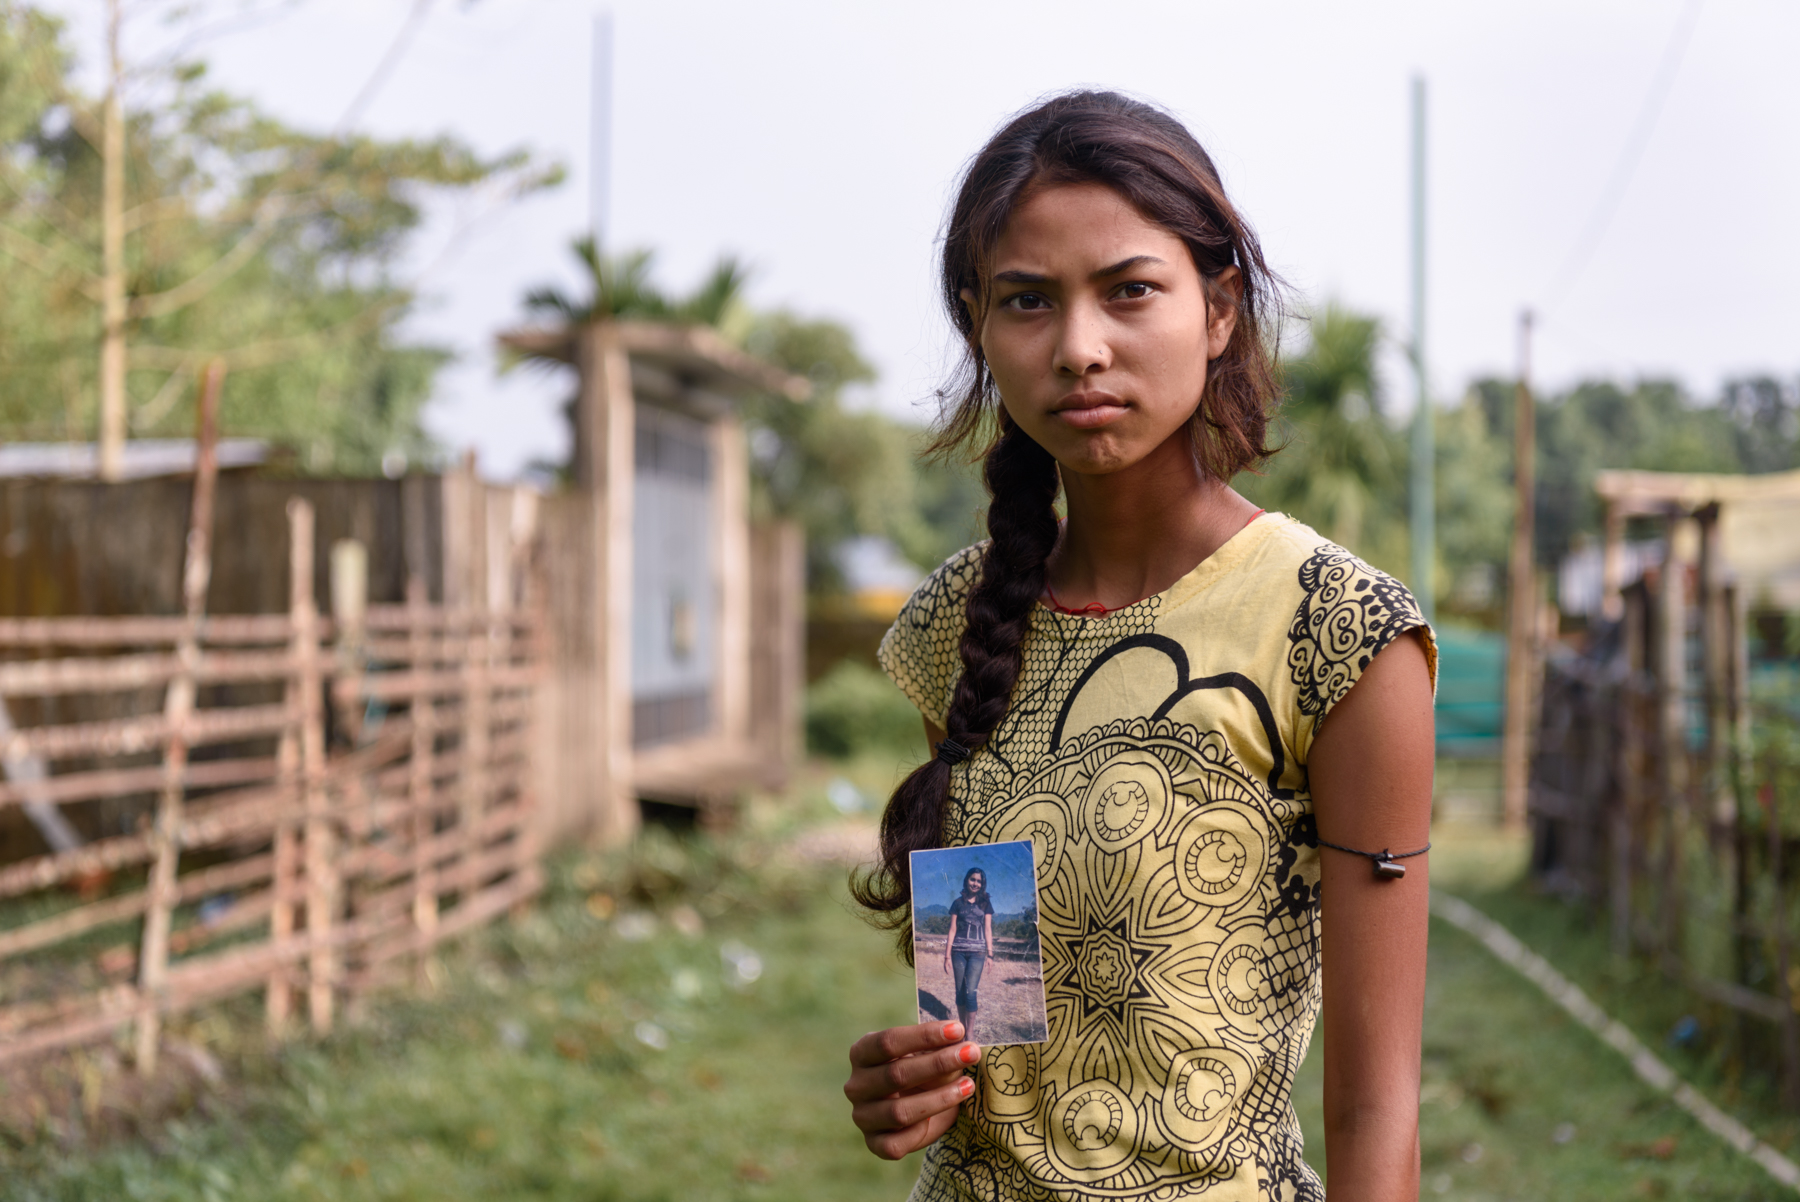  Binita Biswakarma, 15, with a photograph of her sister Ranjana. Ranjana, 16, has been missing since 2009. She was trafficked by her uncle while travelling with him for a family wedding. Binita's parents are illiterate and never filed a police report